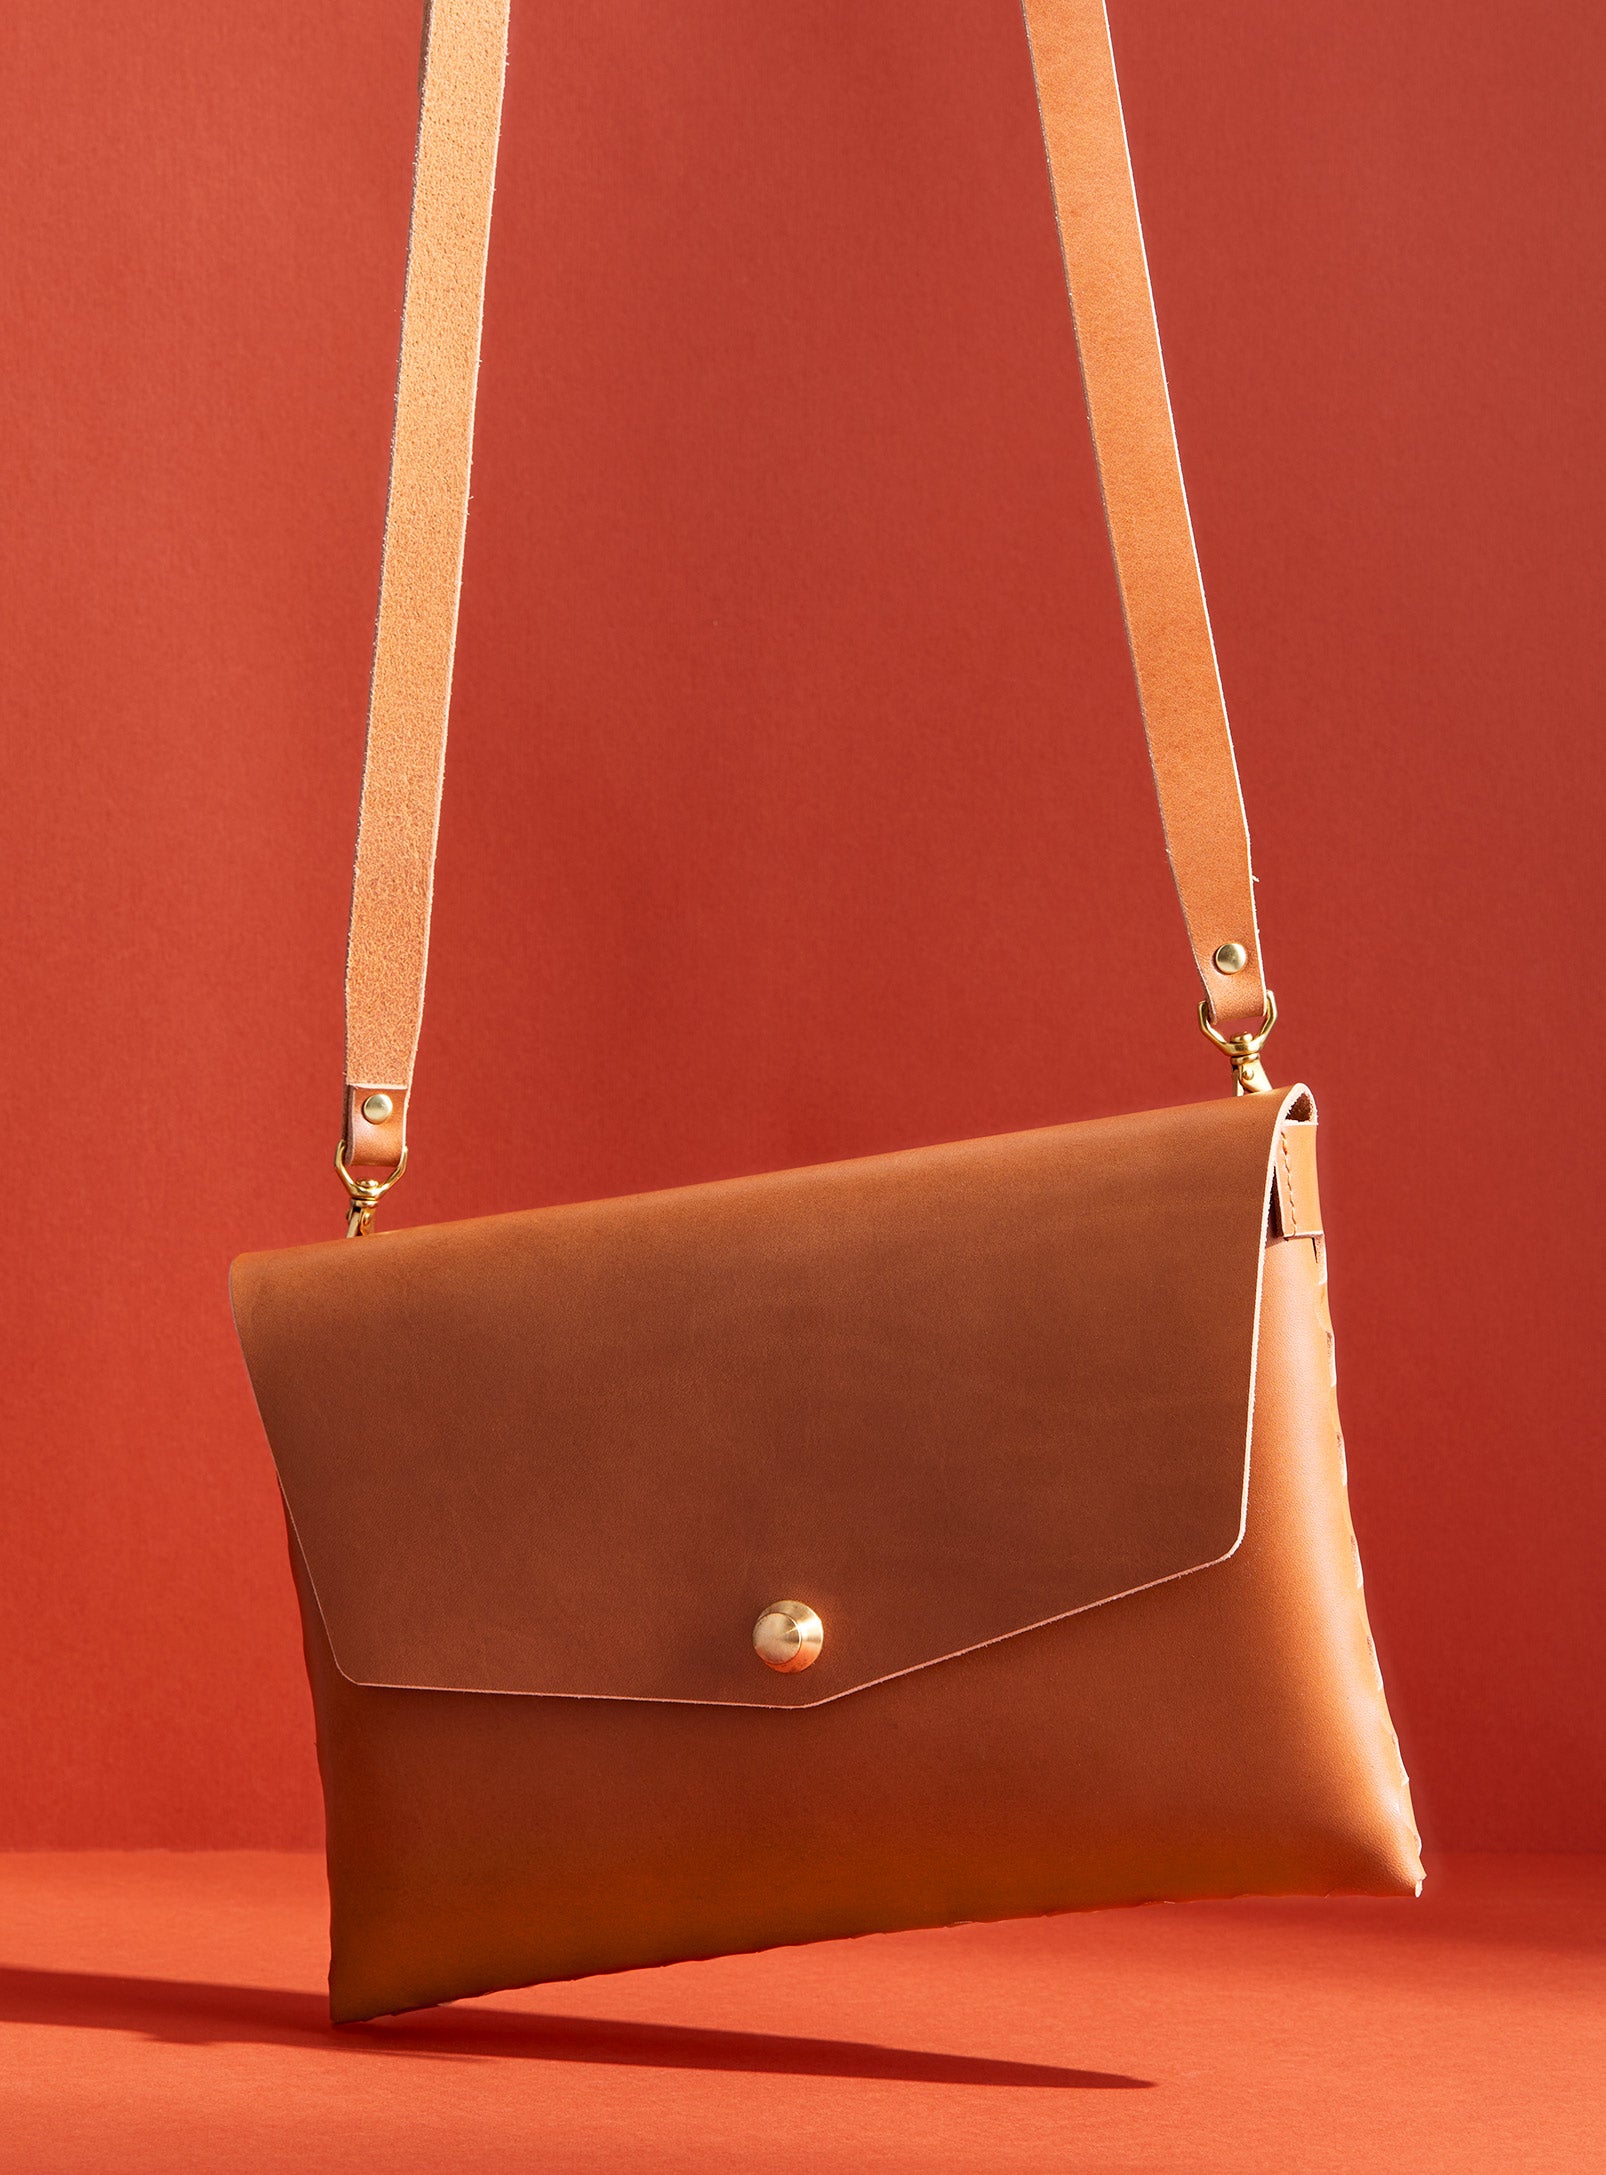 modjūl’s leather mini bag deluxe bag in camel. A larger take on the classic mini bag, a rectangular-shaped bag with long detachable straps, handcrafted in Canada using quality Italian leather and brass hardware.